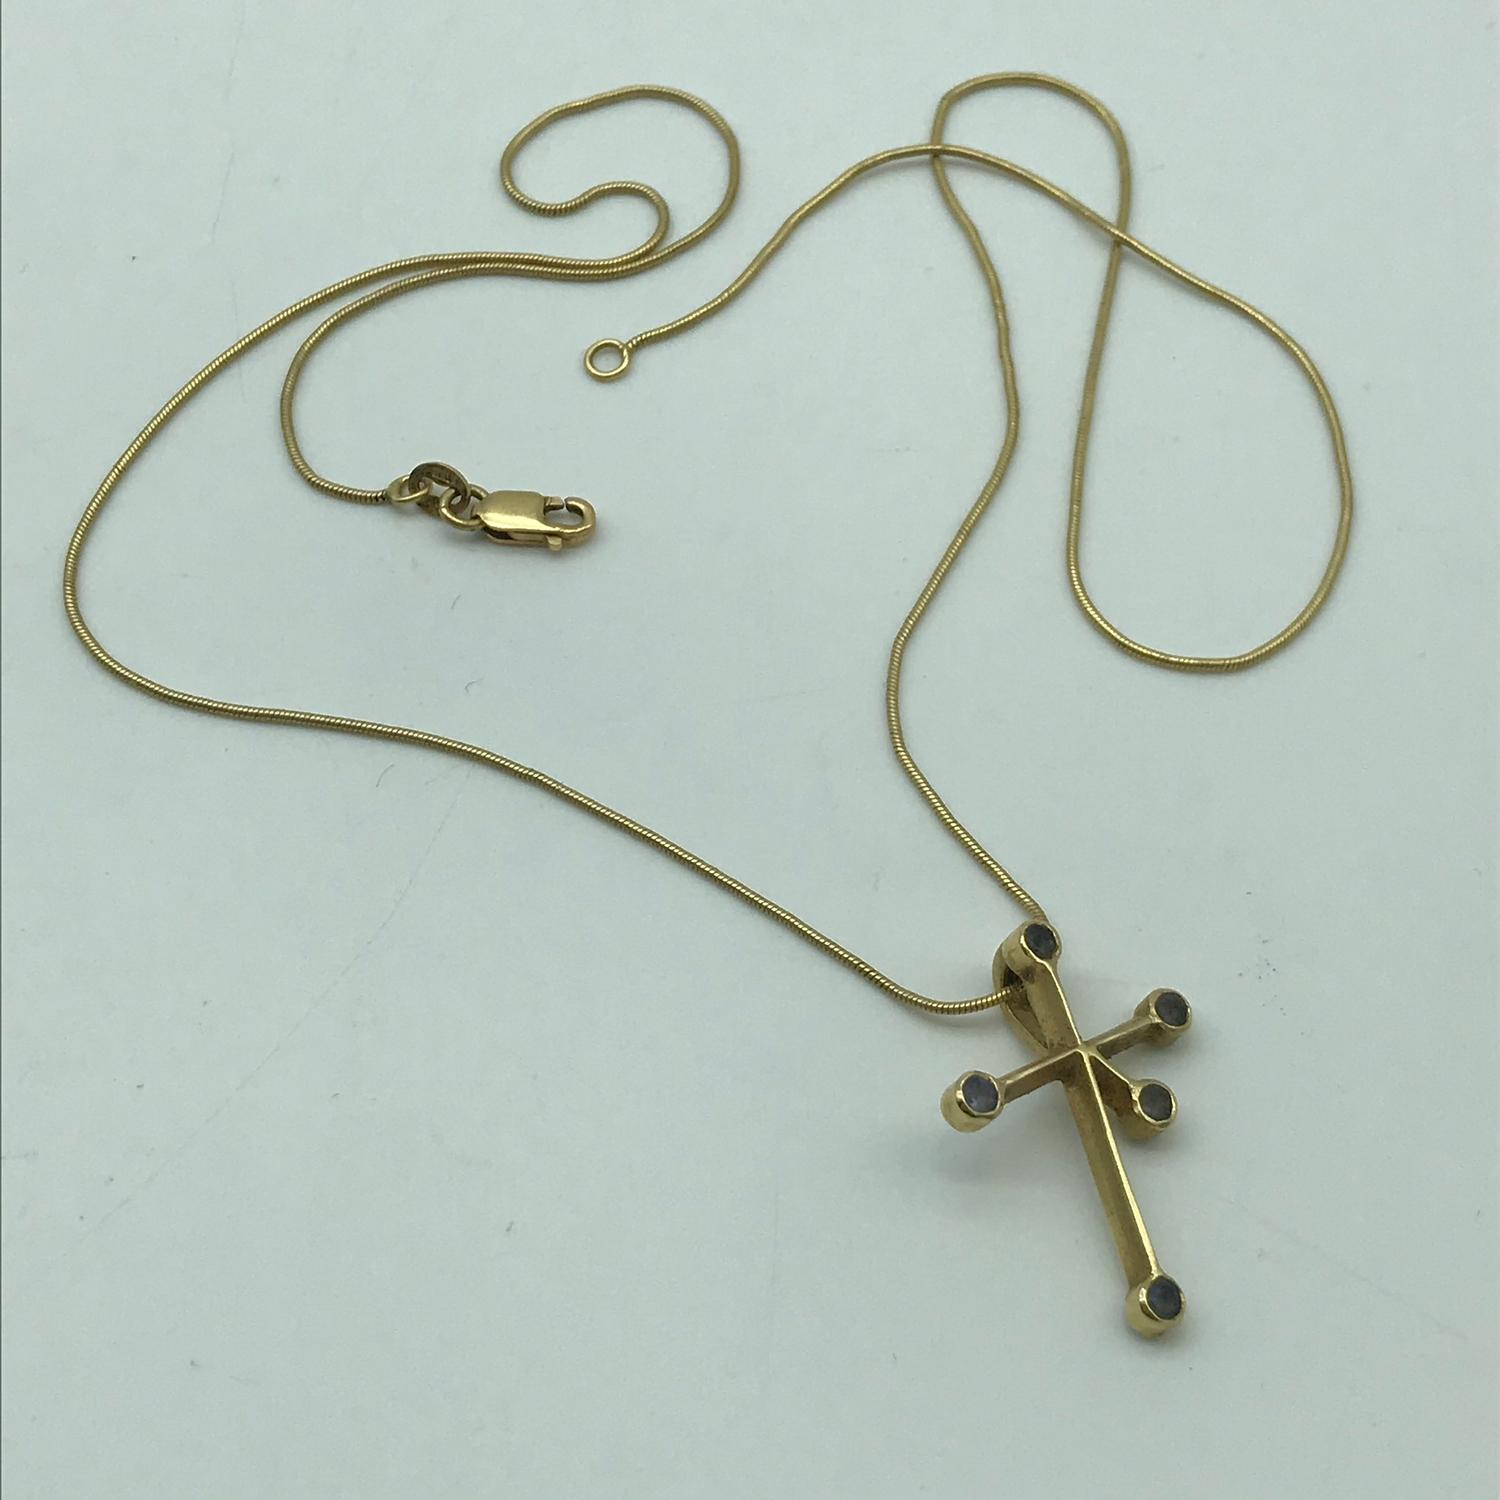 An 18ct gold necklace with an 18ct gold cross like pendant with clear stones. Weighs 5.45grams